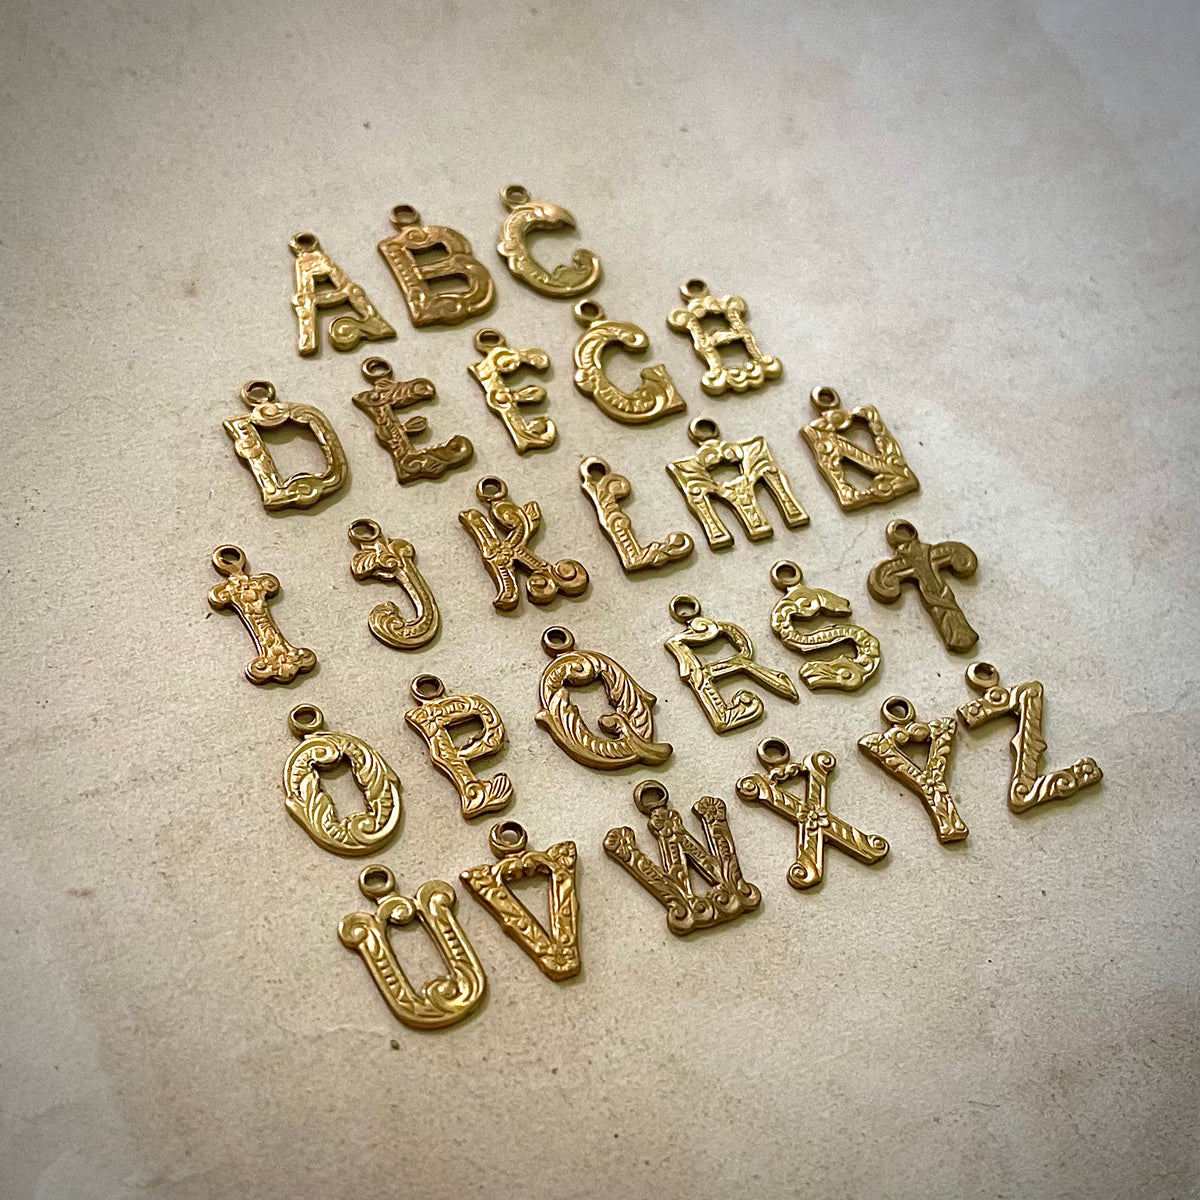 Assortment of Vintage Brass Letter Charms B E F G H M N P R S T W